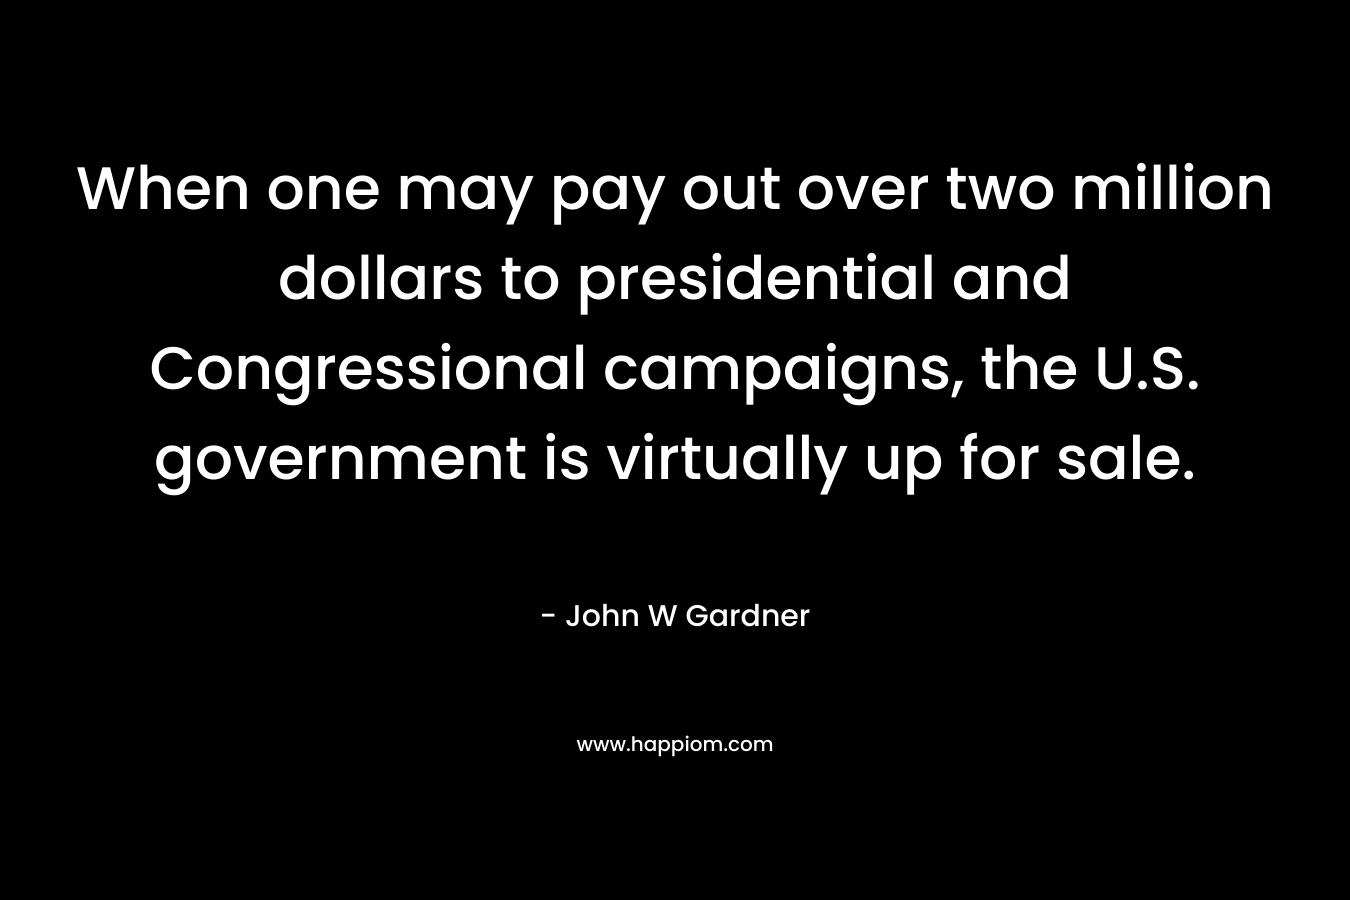 When one may pay out over two million dollars to presidential and Congressional campaigns, the U.S. government is virtually up for sale. – John W Gardner